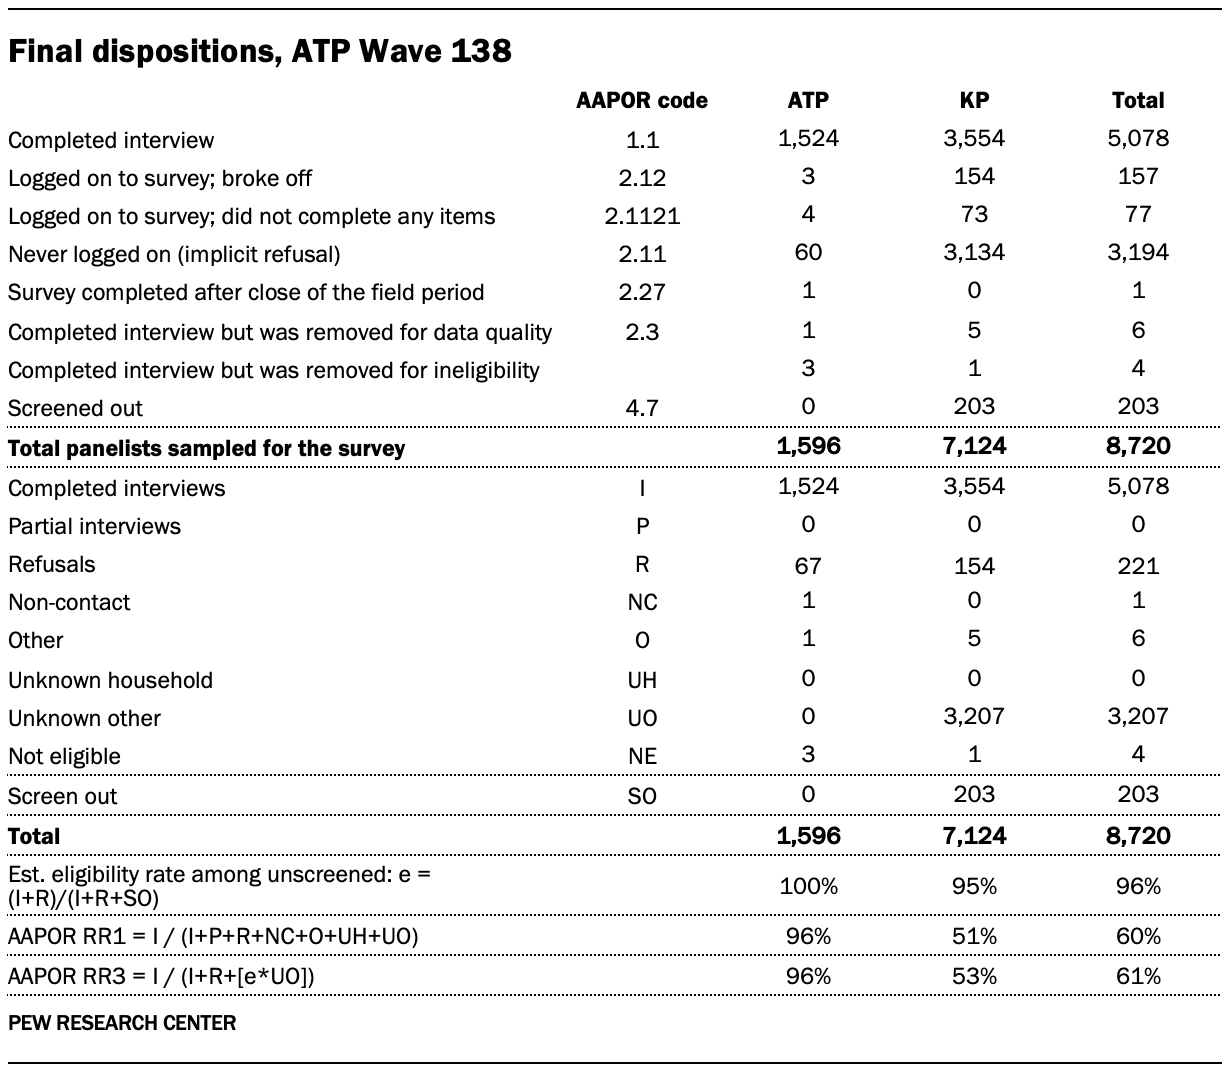 A table showing Final dispositions, ATP Wave 138